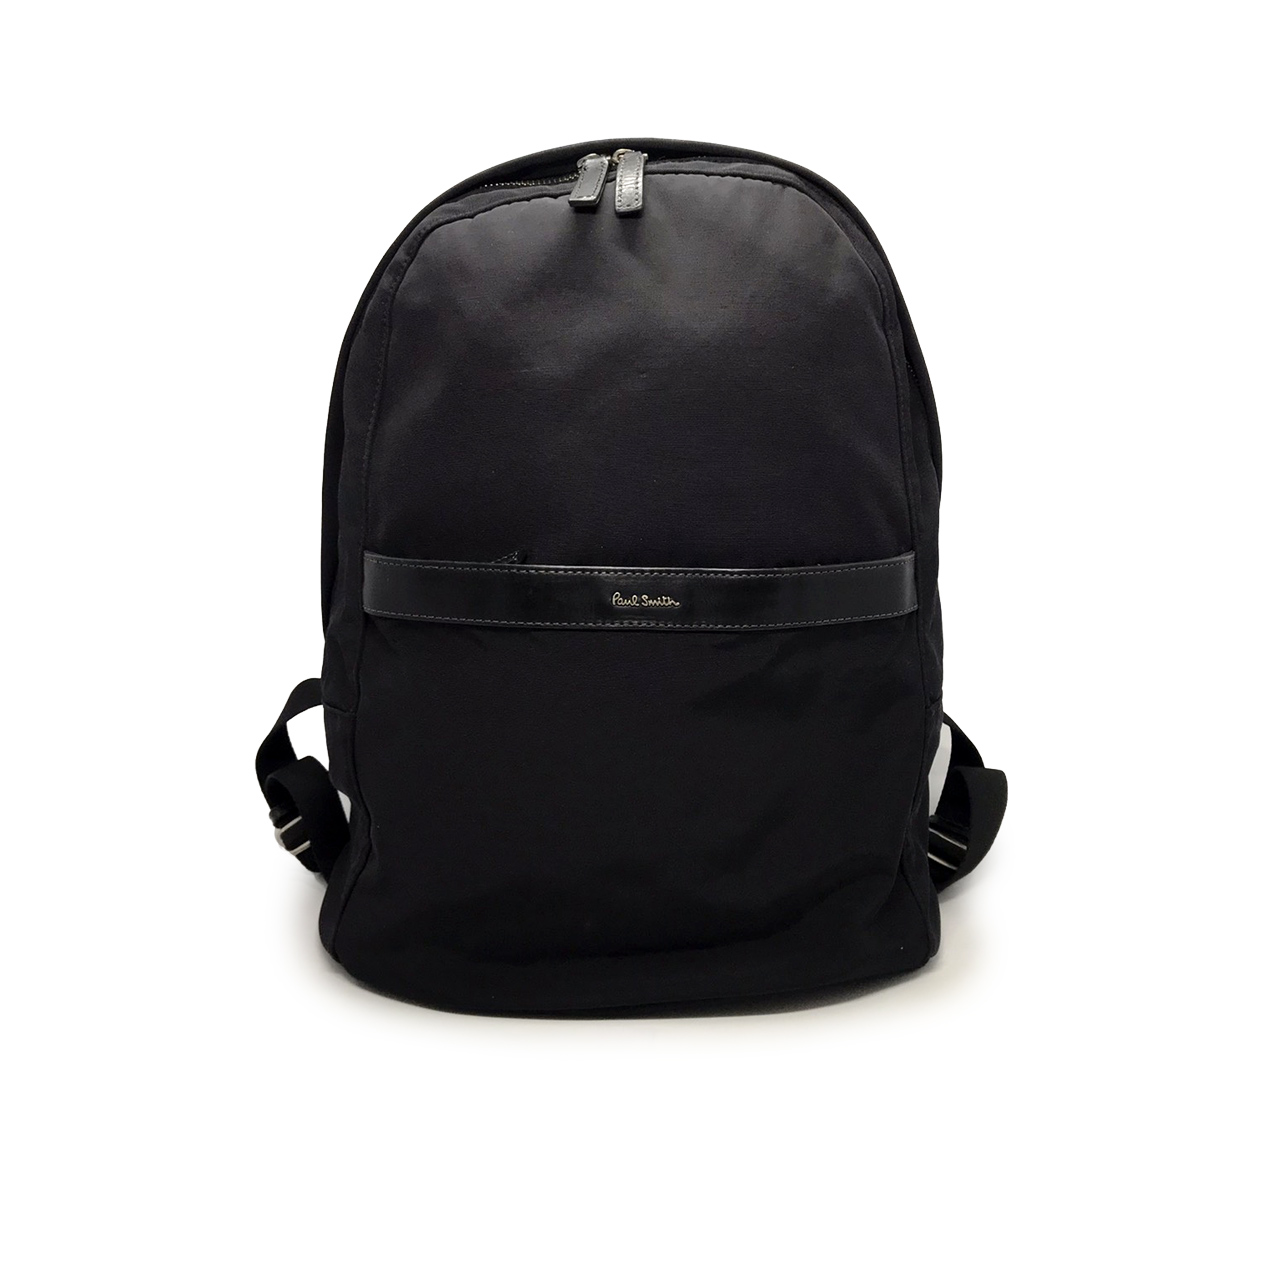 Used Paul Smith Backpack in Black Canvas SHW - Moppetbrandname